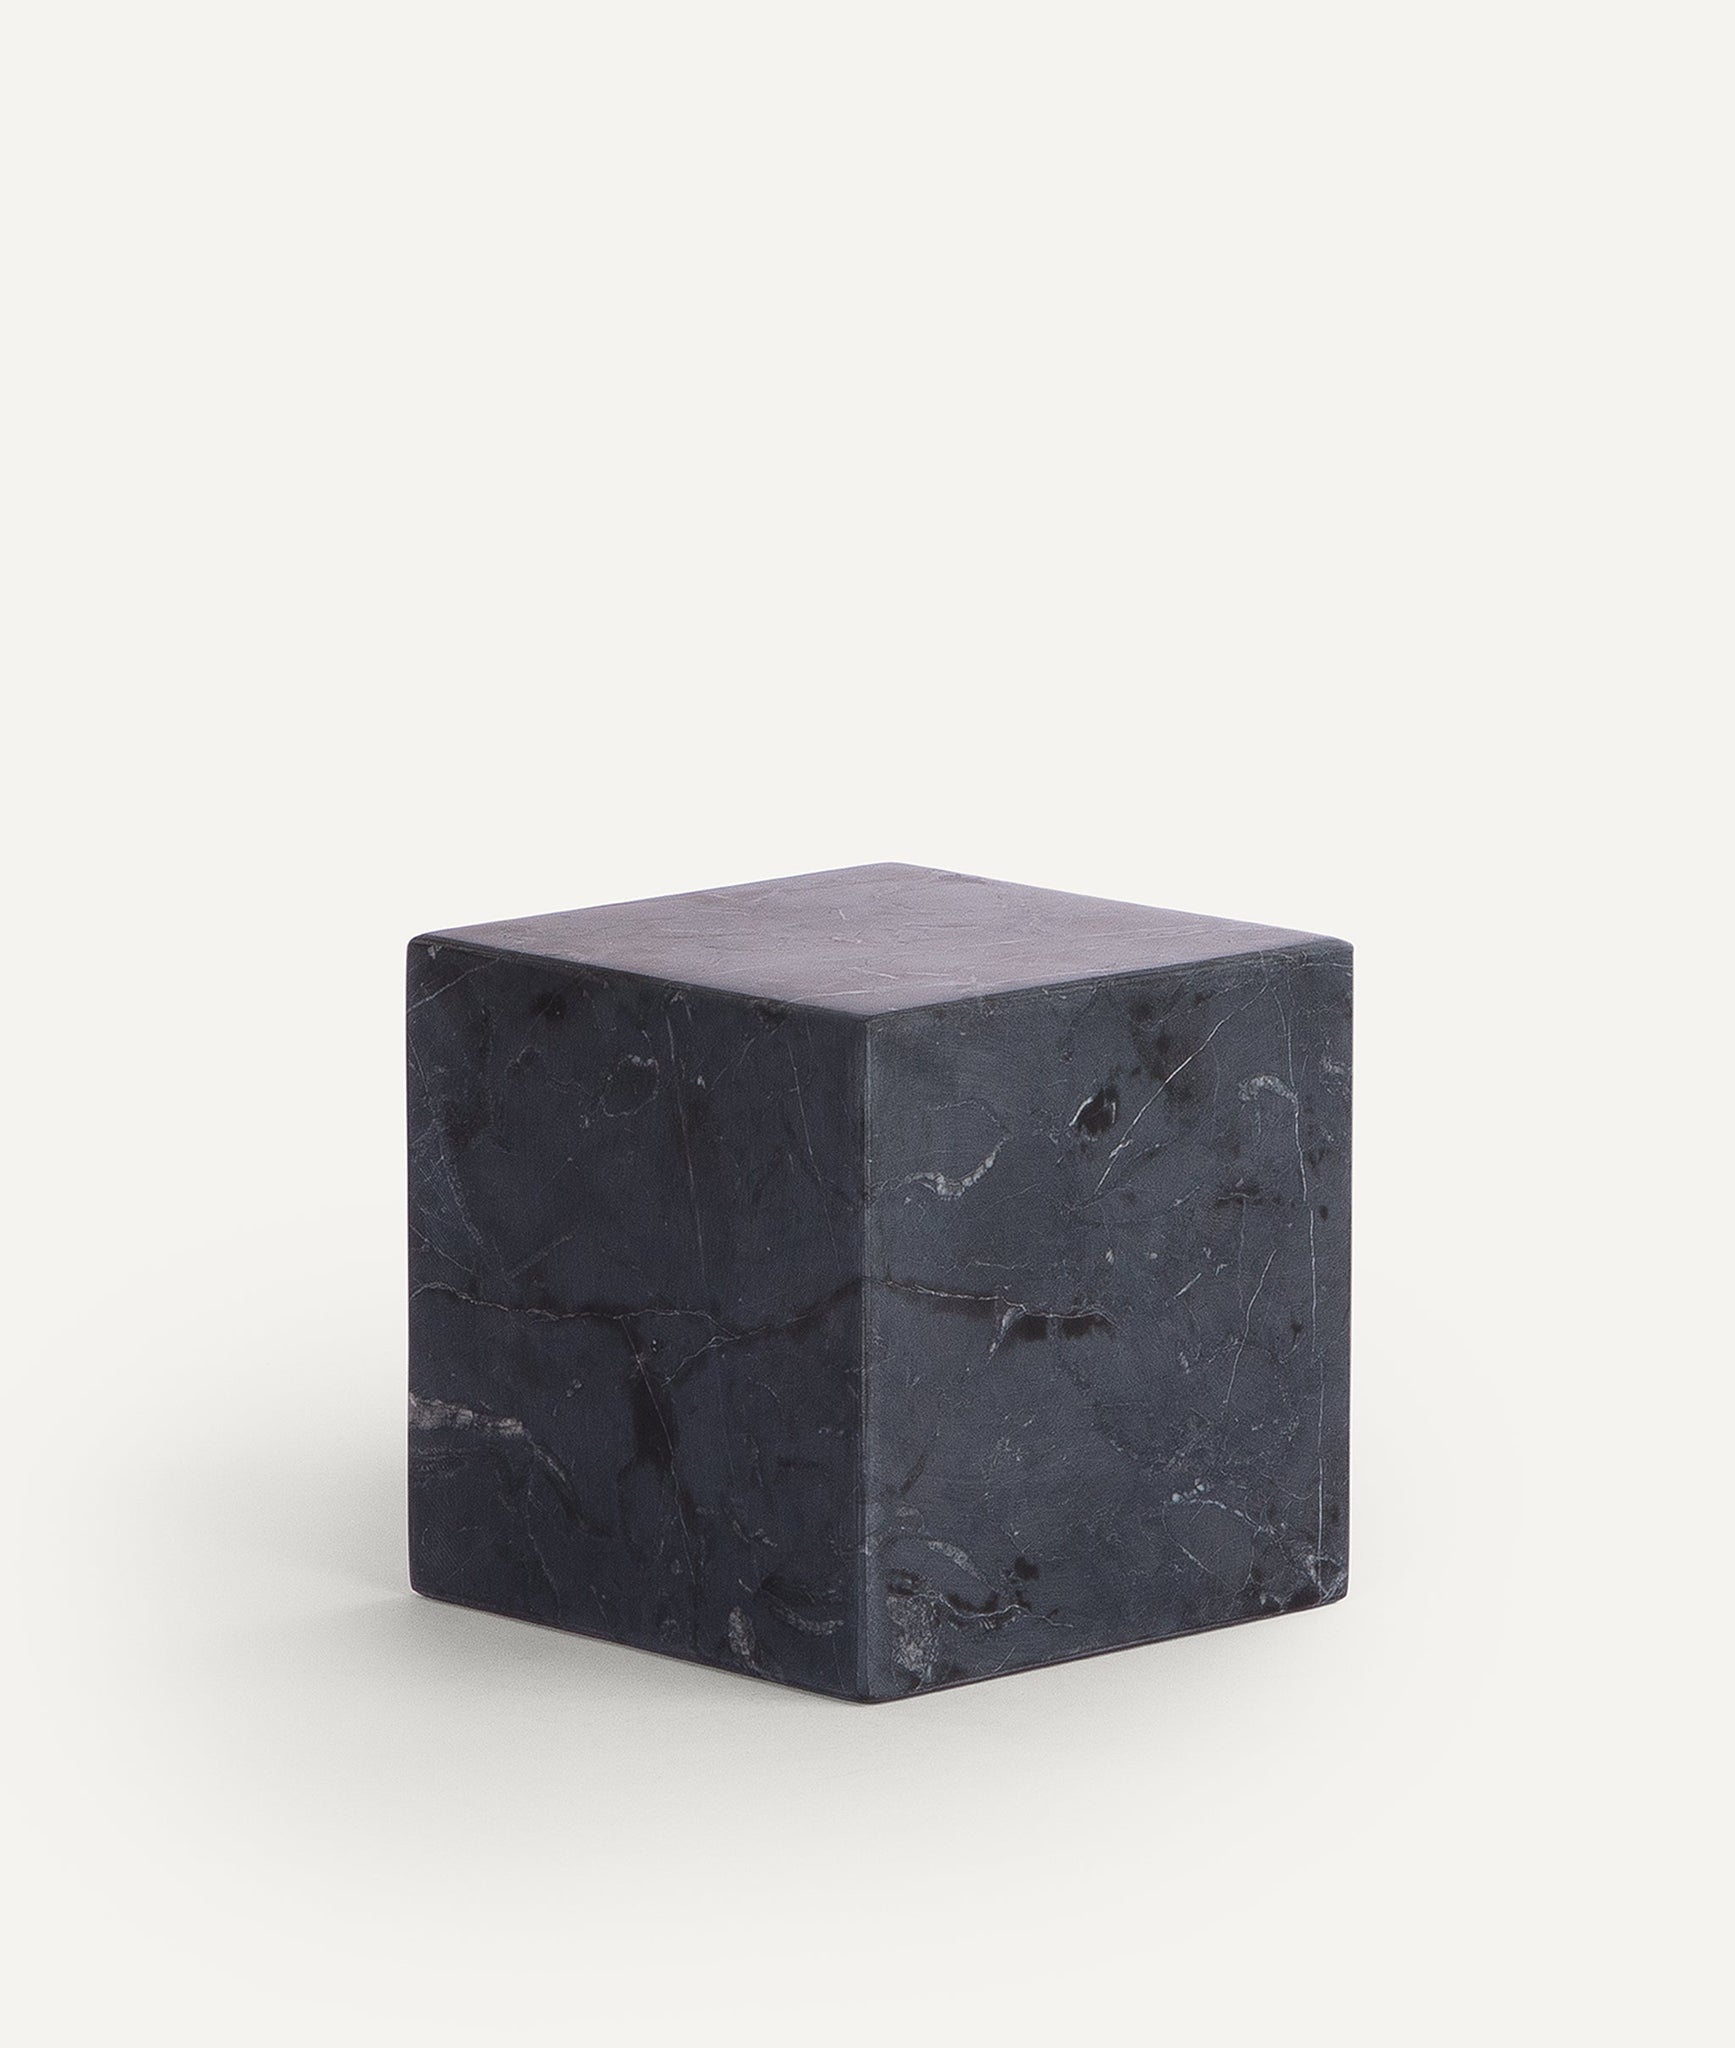 Paper weight in Carrara Marble